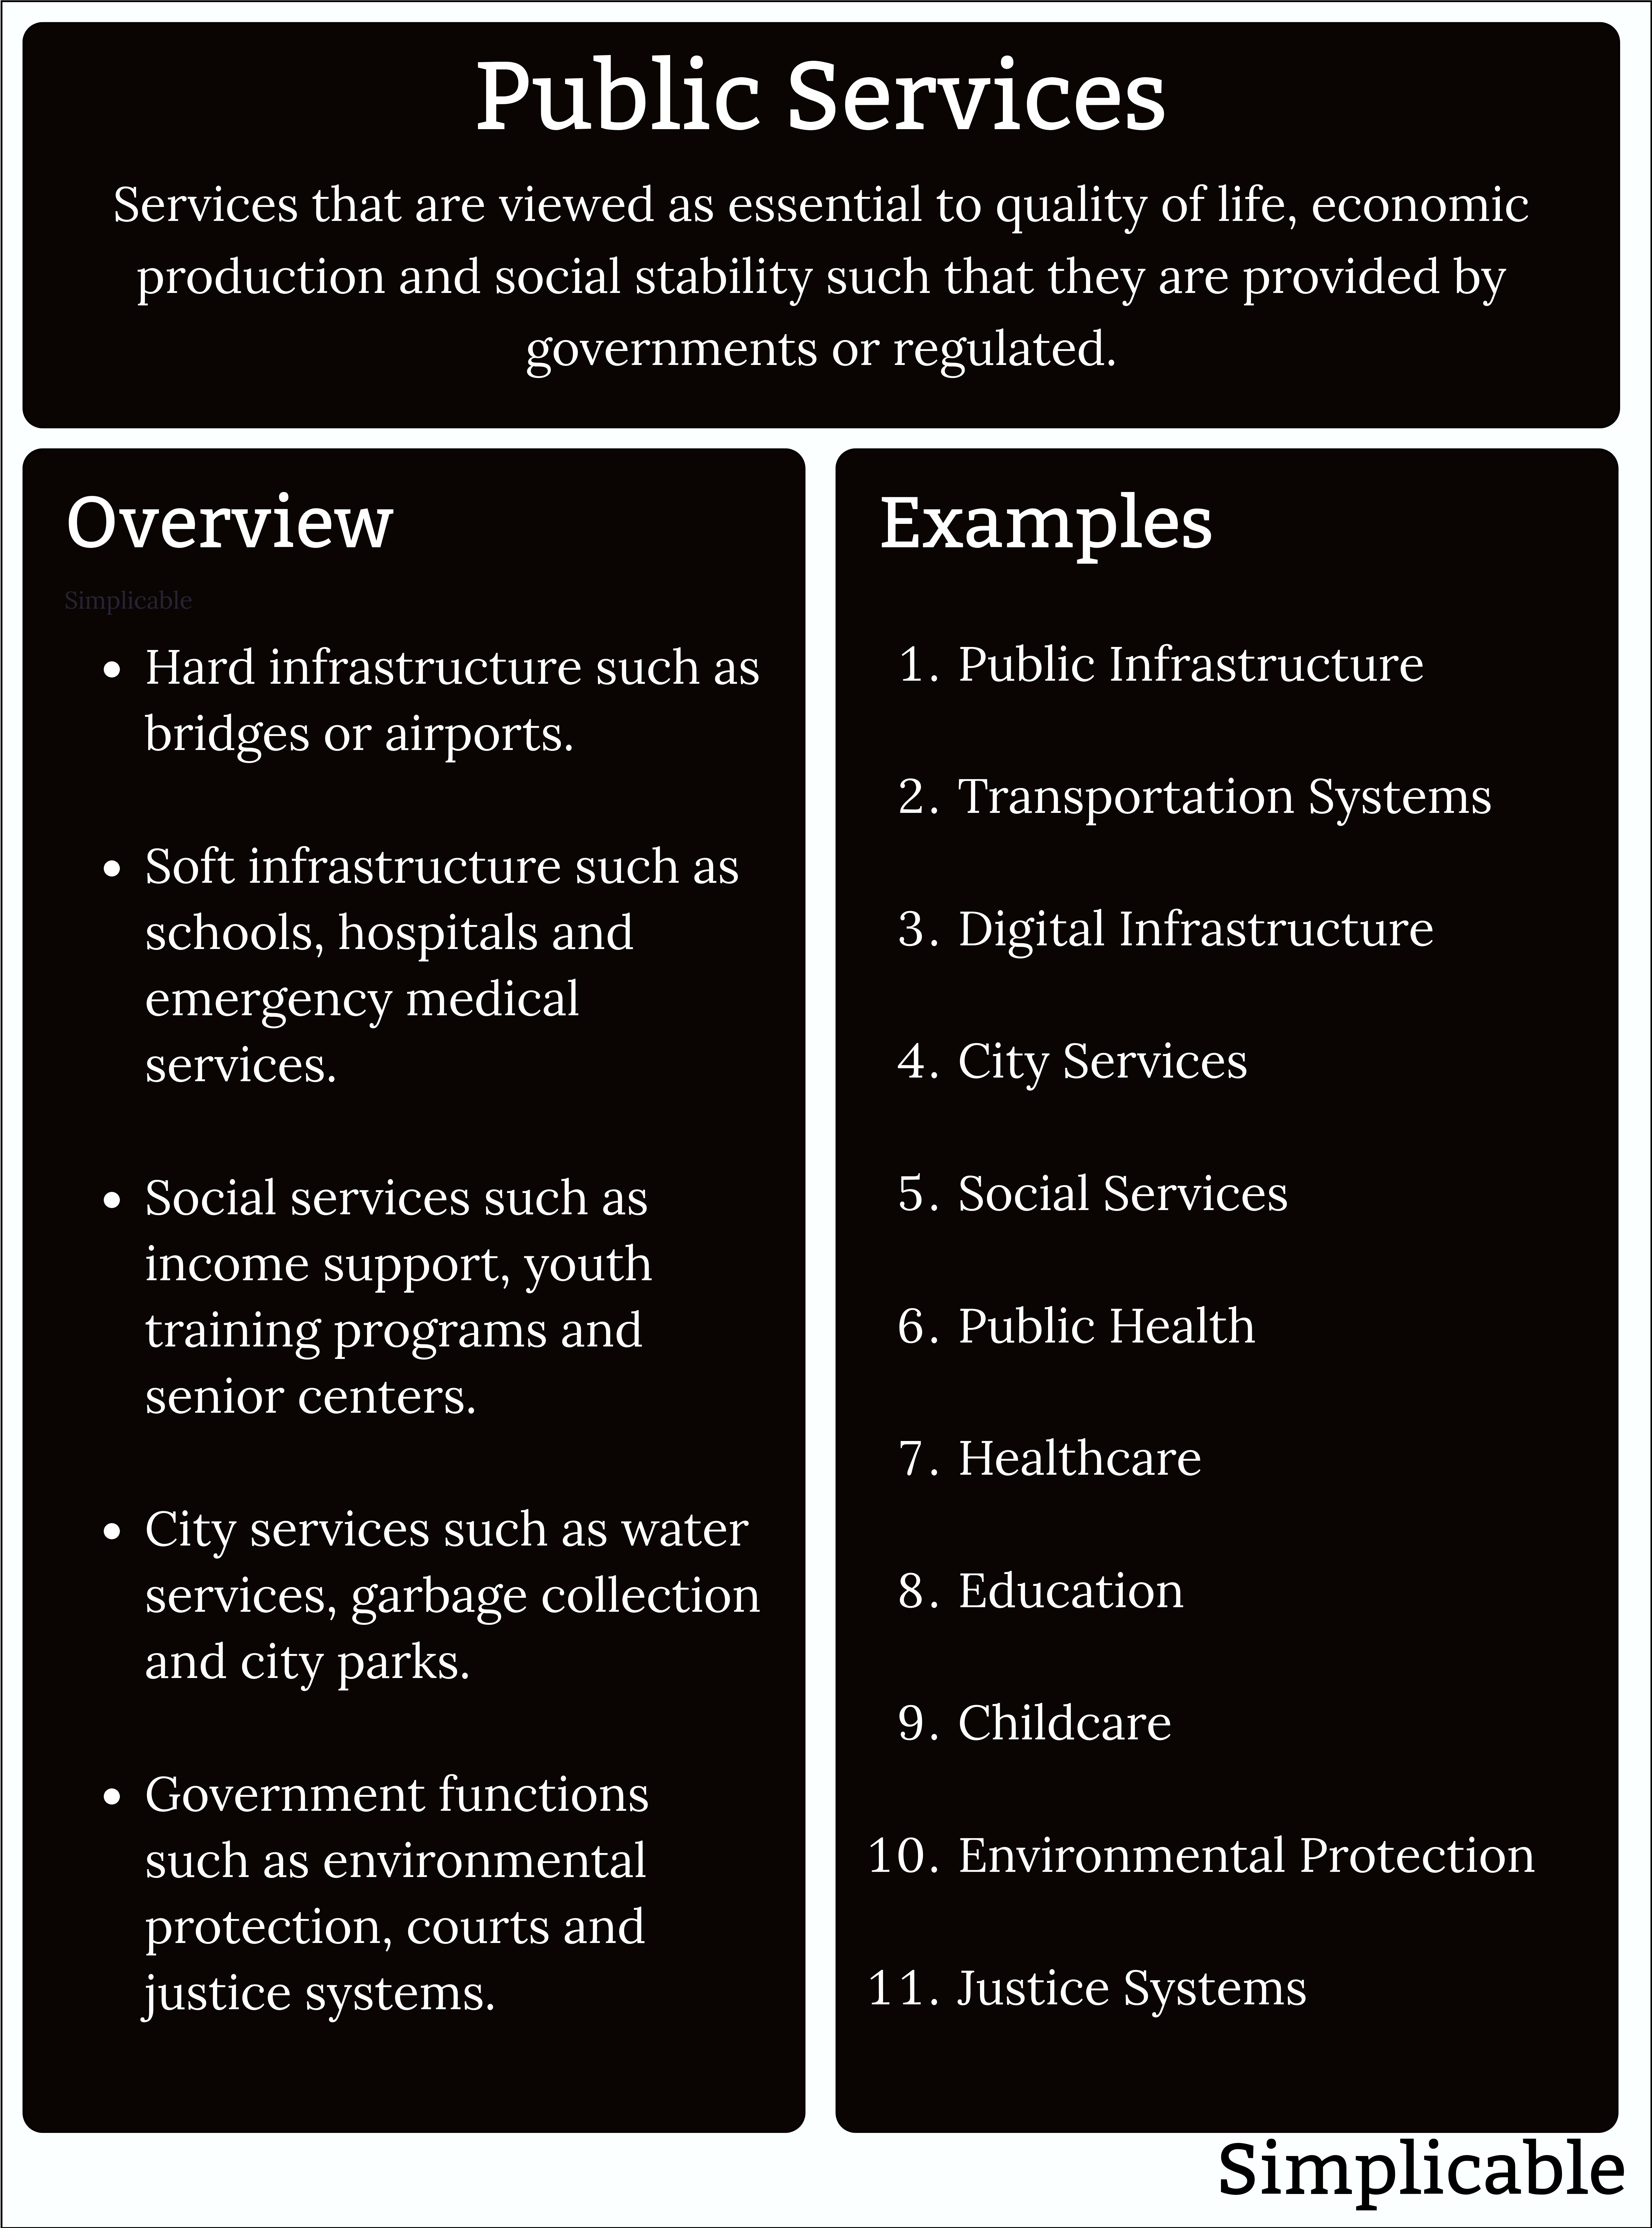 public services overview and examples